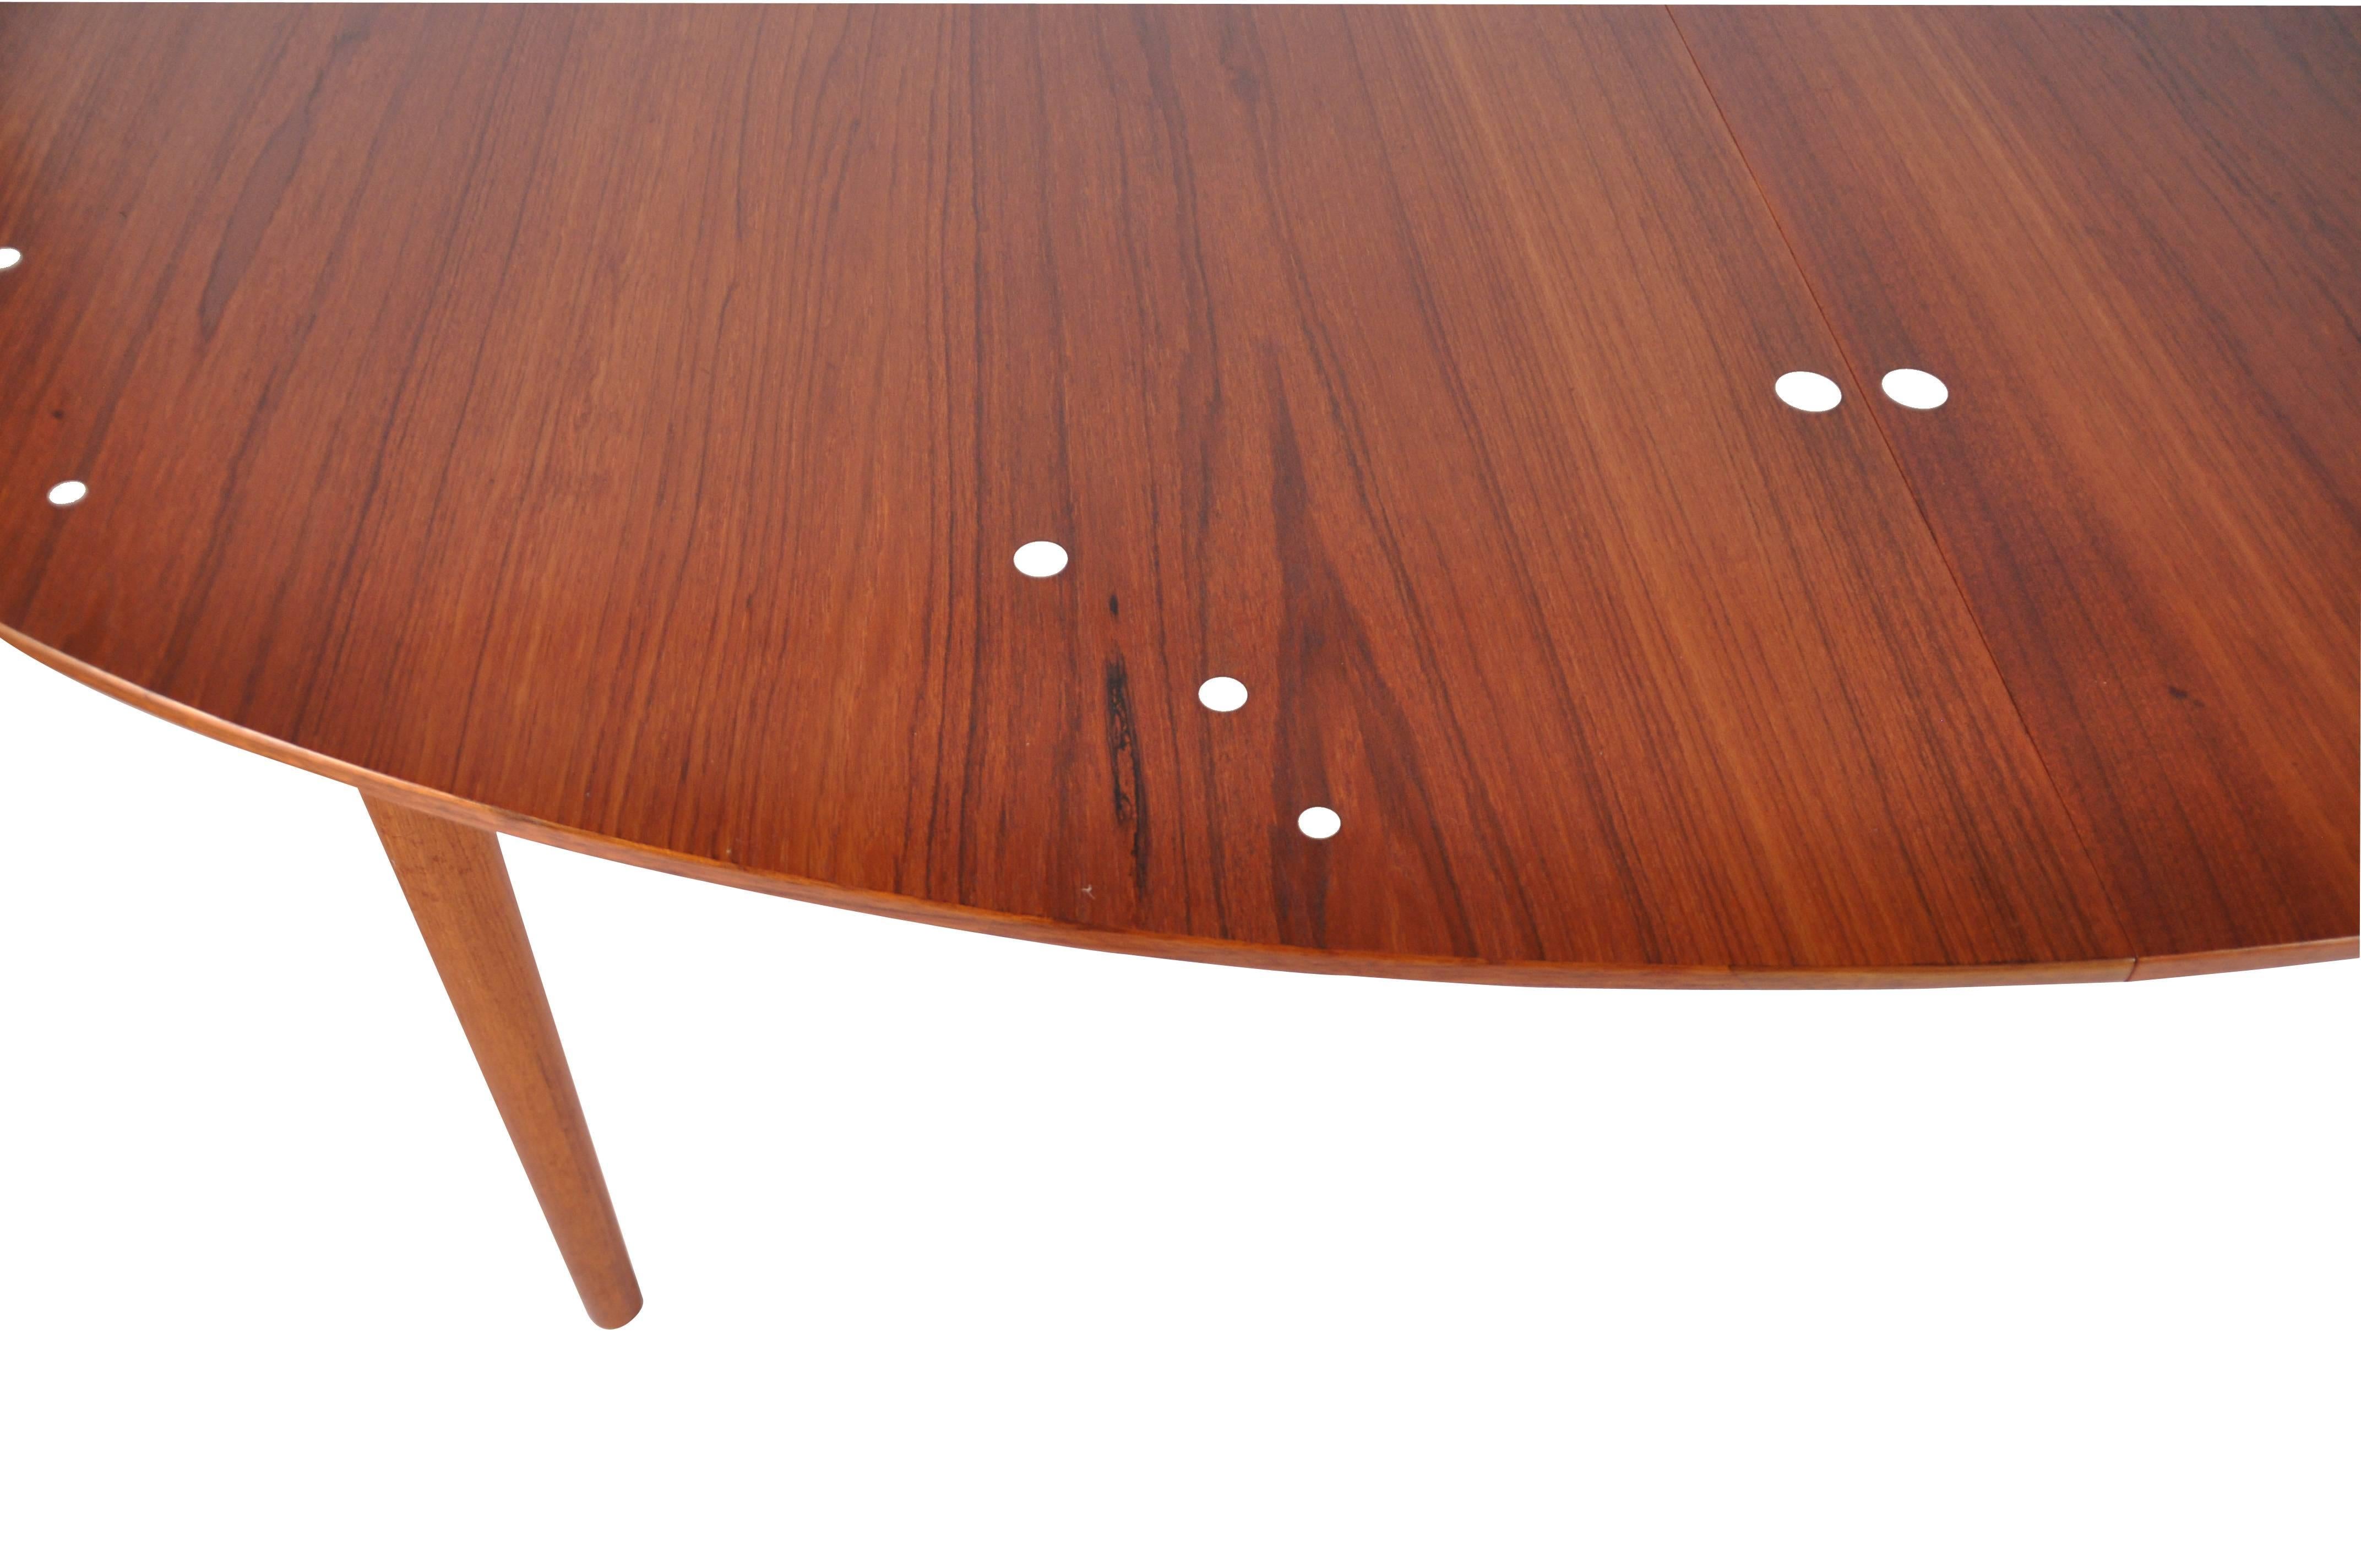 Finn Juhl 'Judas' dining table in teak for Niels Vodder with two extension leaves and silver inlays for cabinetmaker Niels Vodder. Designed 1948.

Note that this table was made in two sizes and this is the large version with a width of 140 cm (55